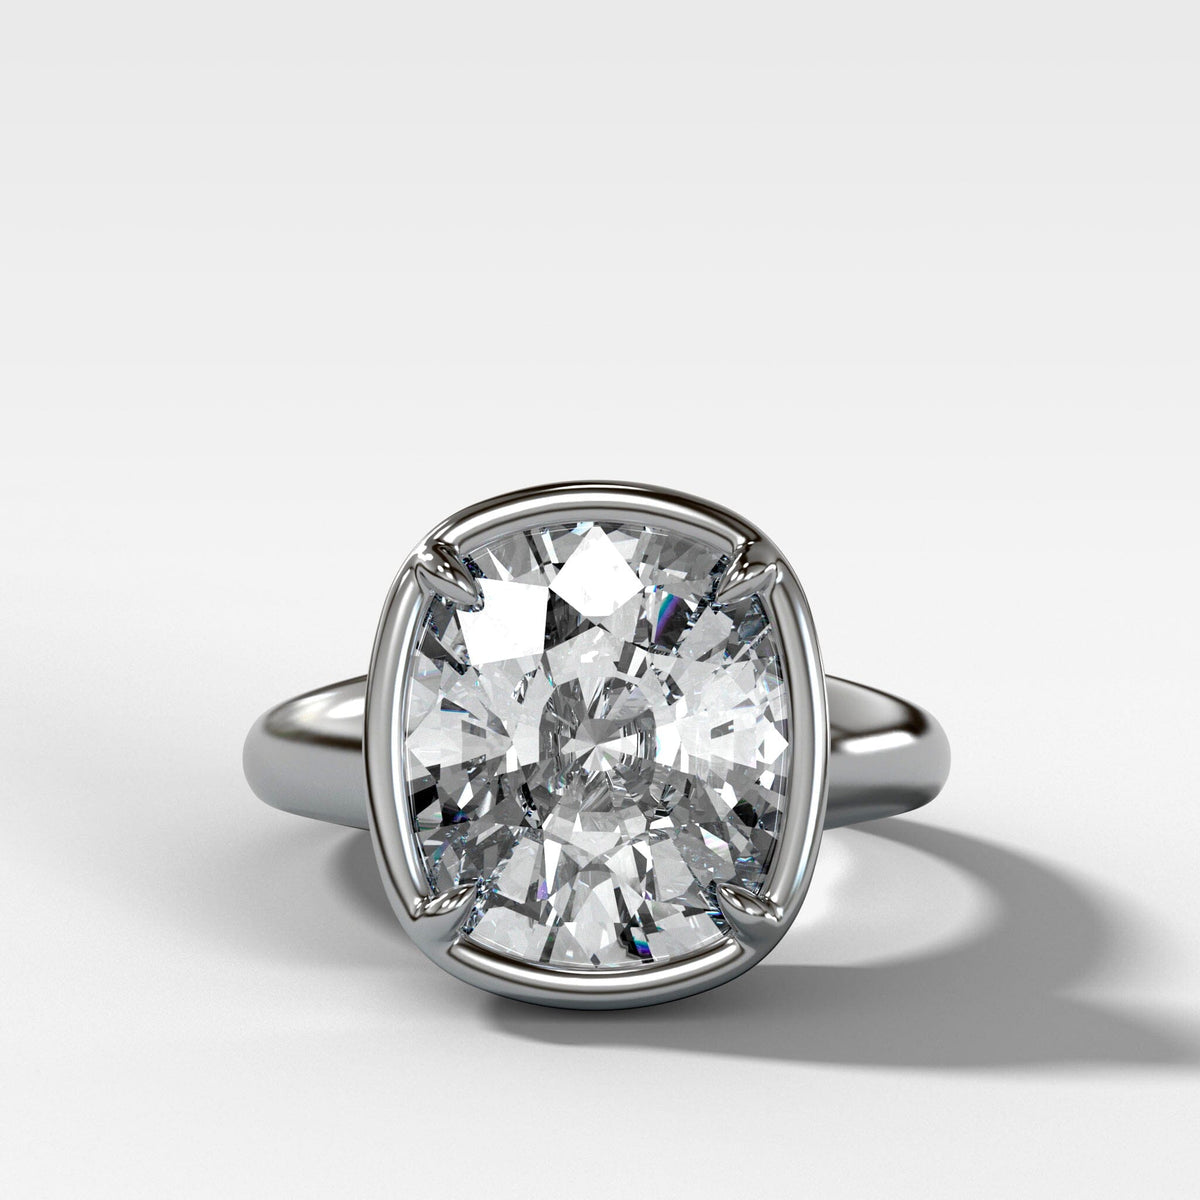 Club Ring Solitaire With an Elongated Cushion Cut Engagement Good Stone Inc 